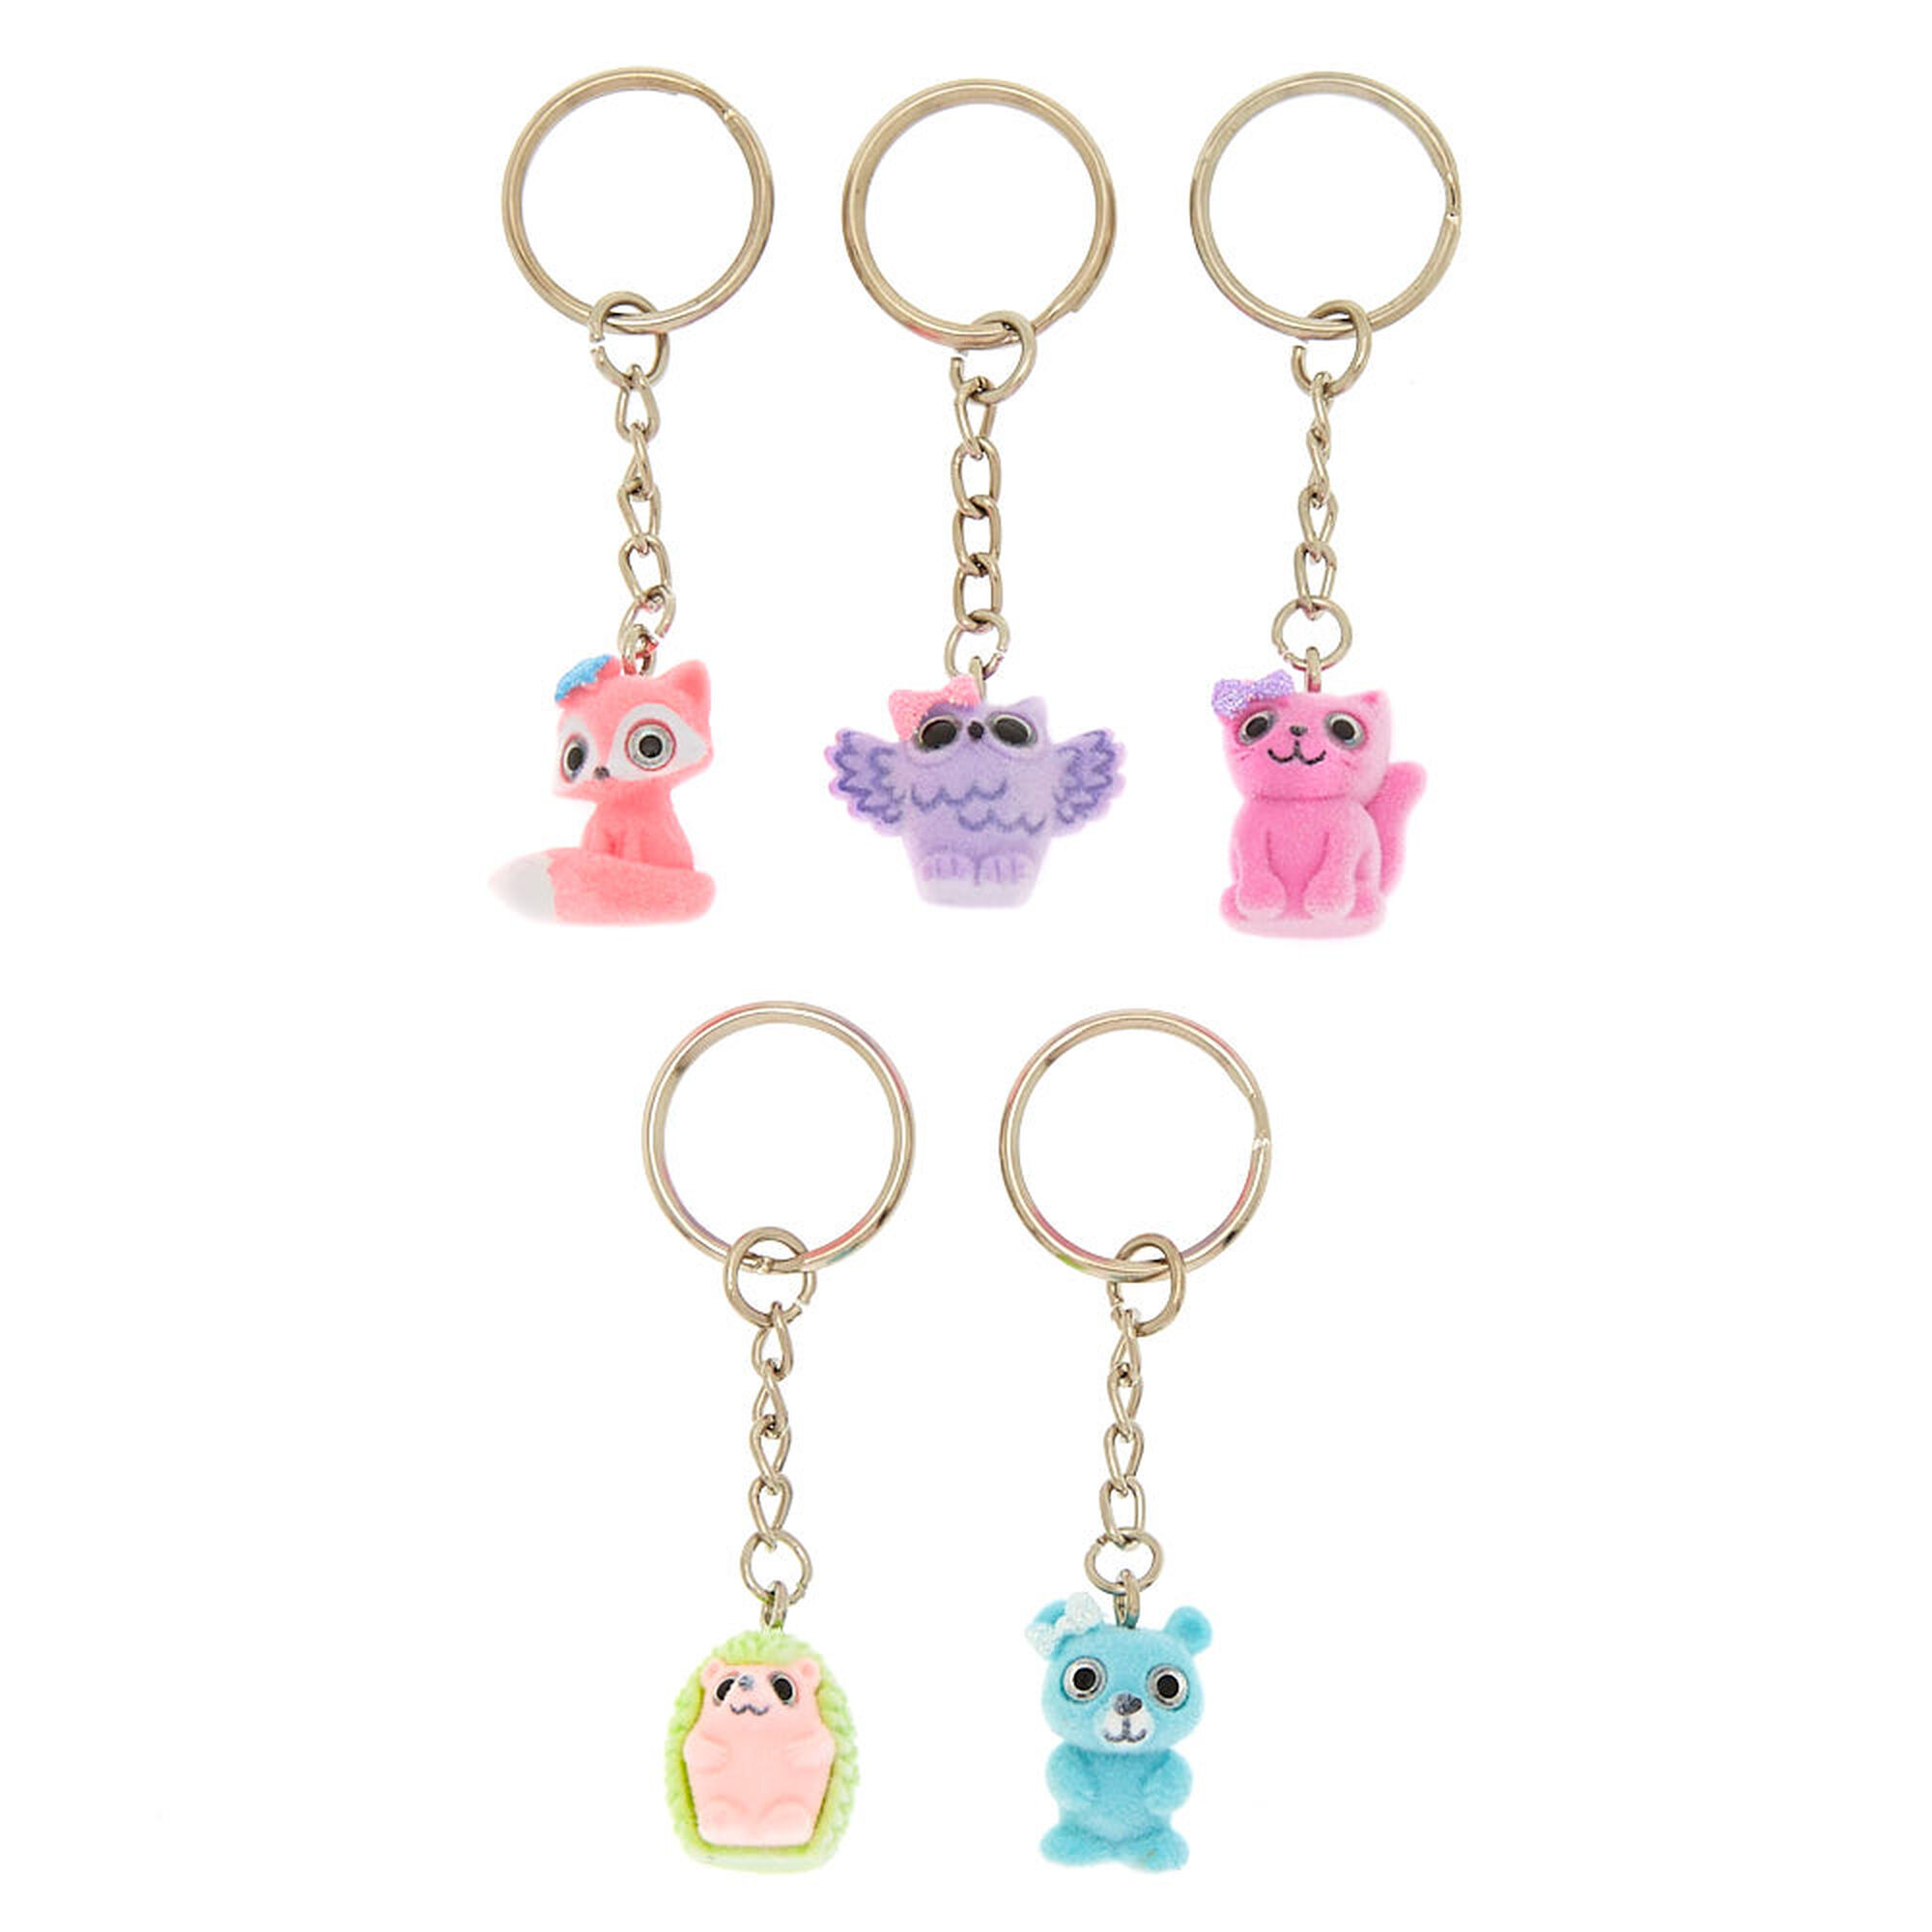 Dress Up Fruit Critters Best Friends Keychains - 5 Pack